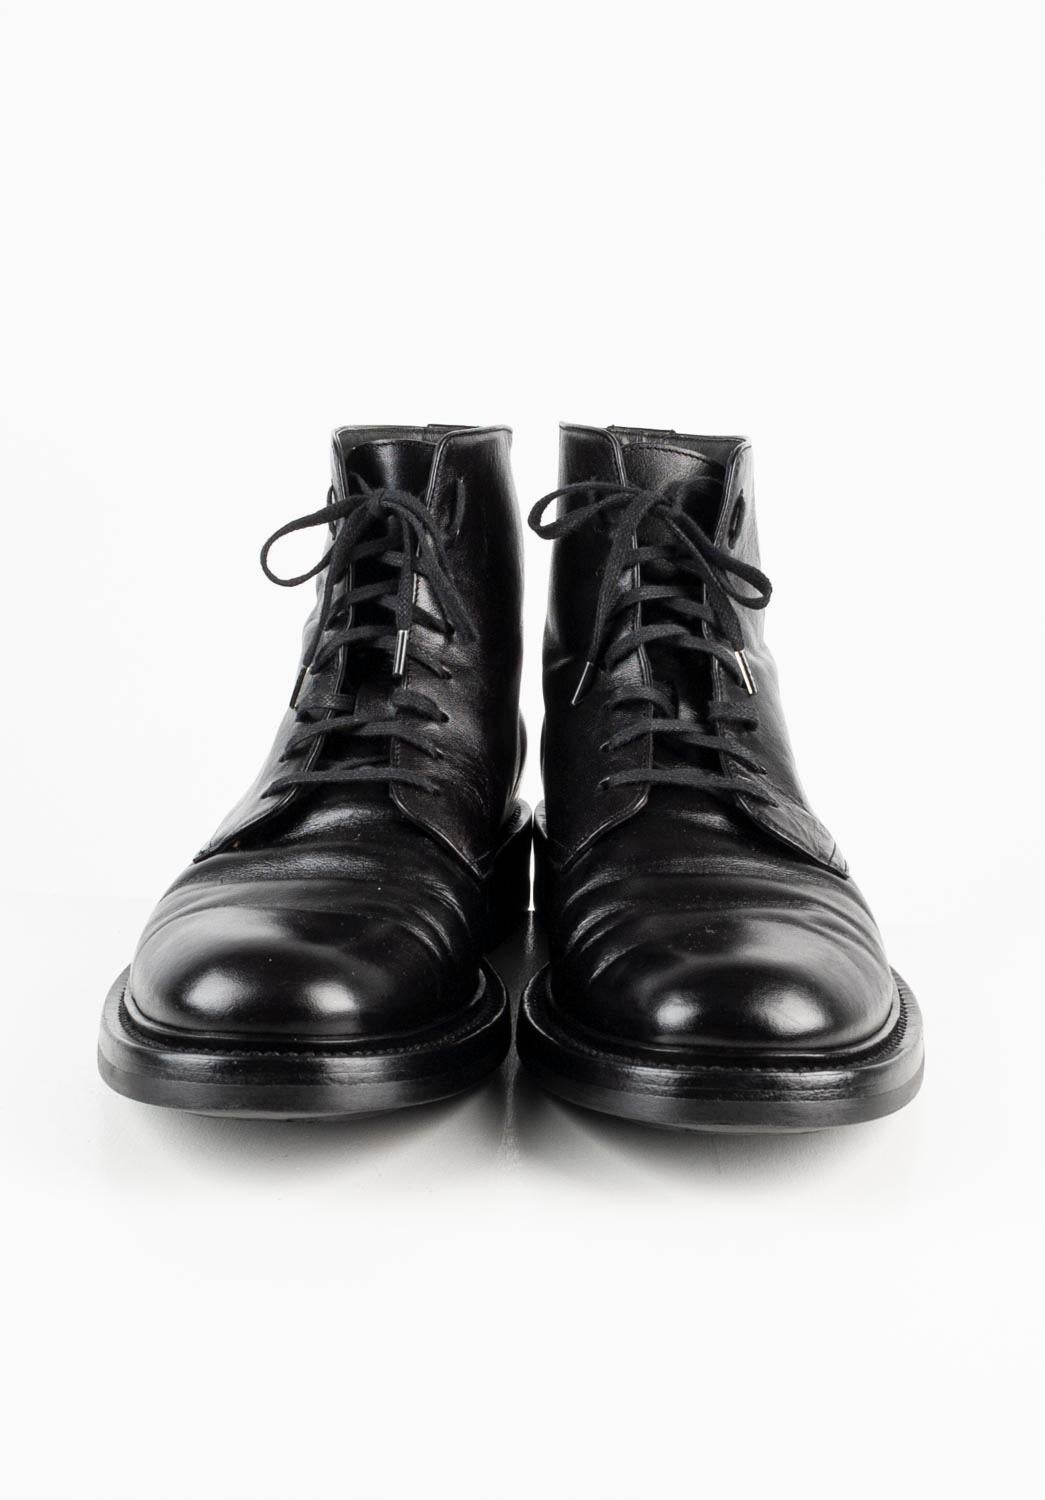 100% genuine Saint Laurent Men Boots, S563
Color: black
(An actual color may a bit vary due to individual computer screen interpretation)
Material: leather
Tag size: EUR41, USA 7 ½, UK 6 1/2
These shoes are great quality item. Rate 8.5 of 10, very